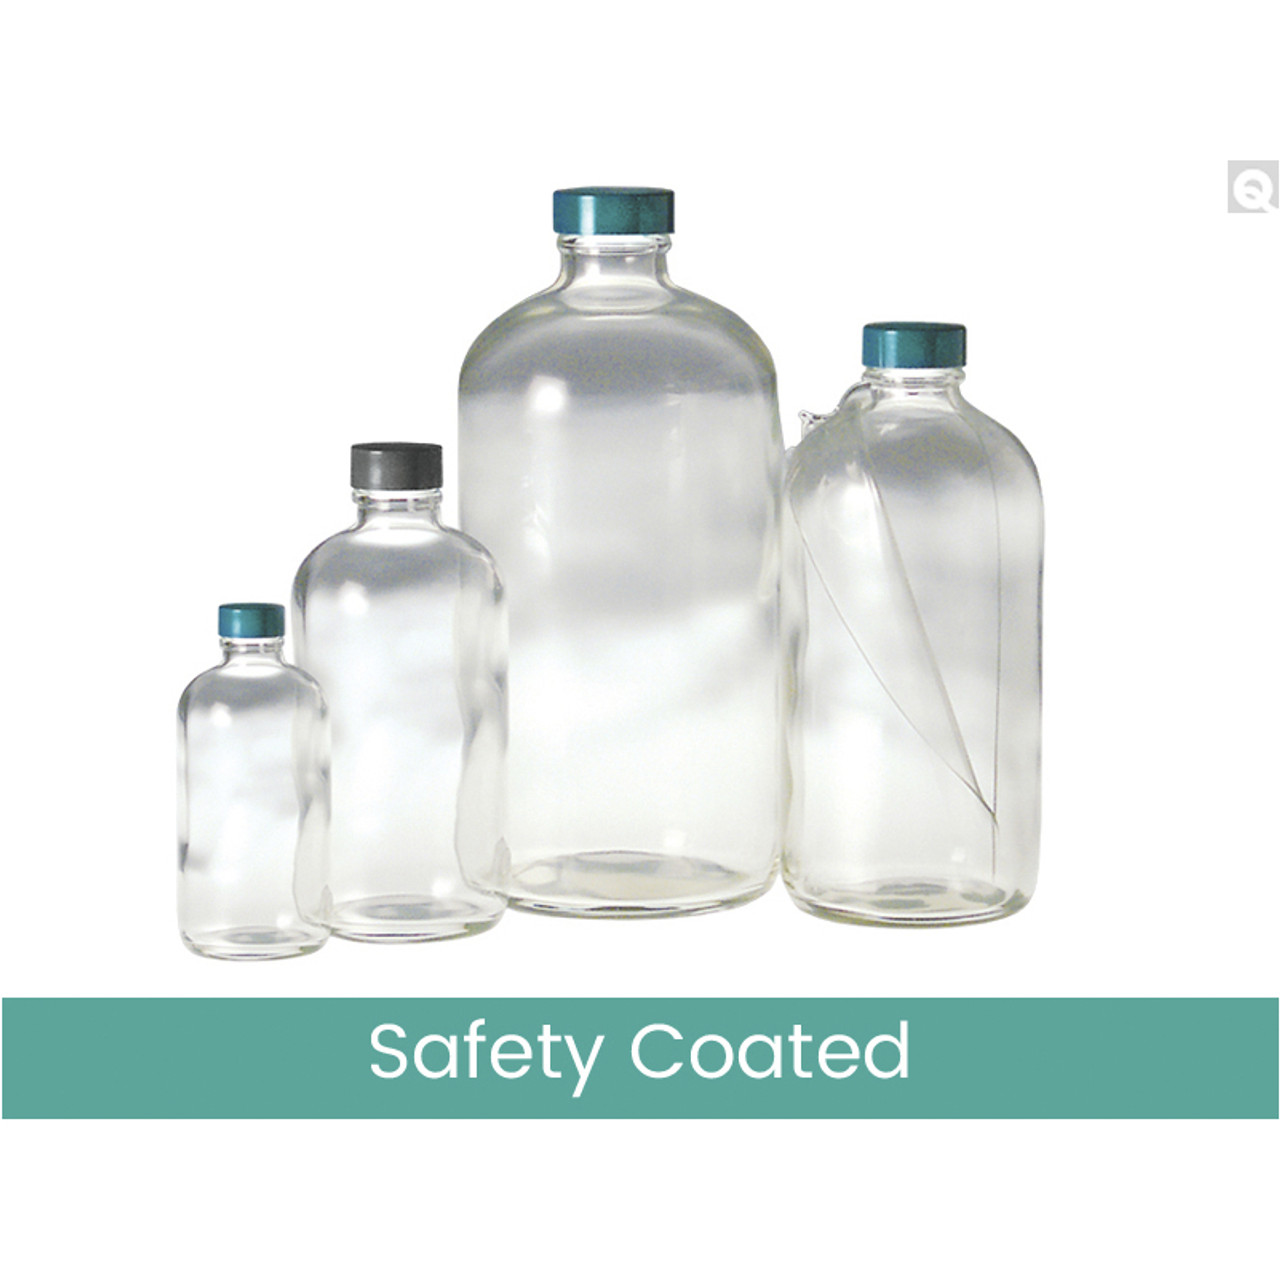 https://cdn11.bigcommerce.com/s-3yvzqa/images/stencil/1280x1280/products/51615/90762/Bottles_Safety_Coated_Boston-Rounds_Clear__62873.1615581072.jpg?c=2